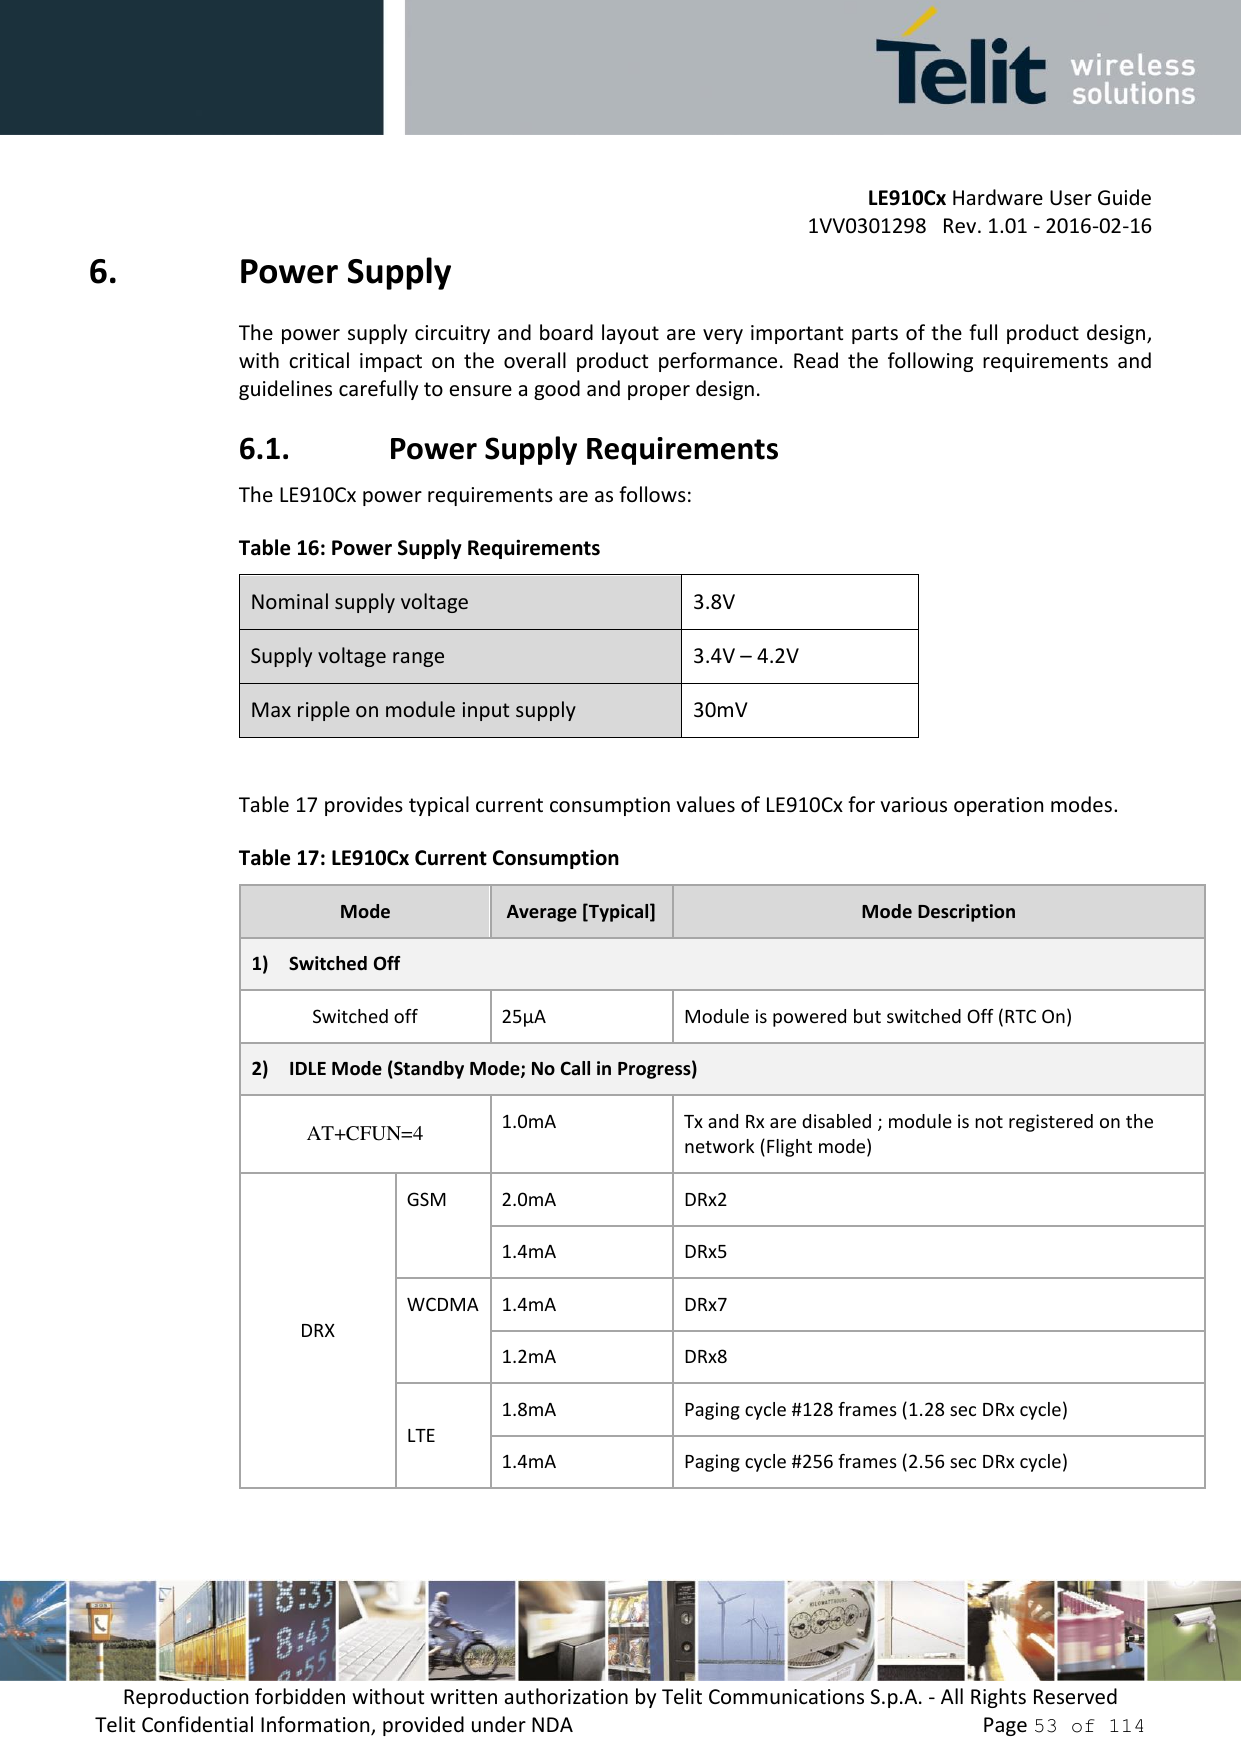         LE910Cx Hardware User Guide     1VV0301298   Rev. 1.01 - 2016-02-16 Reproduction forbidden without written authorization by Telit Communications S.p.A. - All Rights Reserved Telit Confidential Information, provided under NDA                 Page 53 of 114 6. Power Supply The power supply circuitry and board layout are very important parts of the full product design, with  critical  impact  on  the  overall  product  performance.  Read  the  following  requirements  and guidelines carefully to ensure a good and proper design. 6.1. Power Supply Requirements The LE910Cx power requirements are as follows: Table 16: Power Supply Requirements Nominal supply voltage 3.8V Supply voltage range 3.4V – 4.2V Max ripple on module input supply 30mV  Table 17 provides typical current consumption values of LE910Cx for various operation modes. Table 17: LE910Cx Current Consumption Mode Average [Typical] Mode Description 1) Switched Off Switched off 25µA Module is powered but switched Off (RTC On) 2) IDLE Mode (Standby Mode; No Call in Progress) AT+CFUN=4 1.0mA Tx and Rx are disabled ; module is not registered on the network (Flight mode)  DRX GSM 2.0mA DRx2 1.4mA DRx5 WCDMA 1.4mA DRx7 1.2mA DRx8 LTE 1.8mA Paging cycle #128 frames (1.28 sec DRx cycle) 1.4mA Paging cycle #256 frames (2.56 sec DRx cycle) 